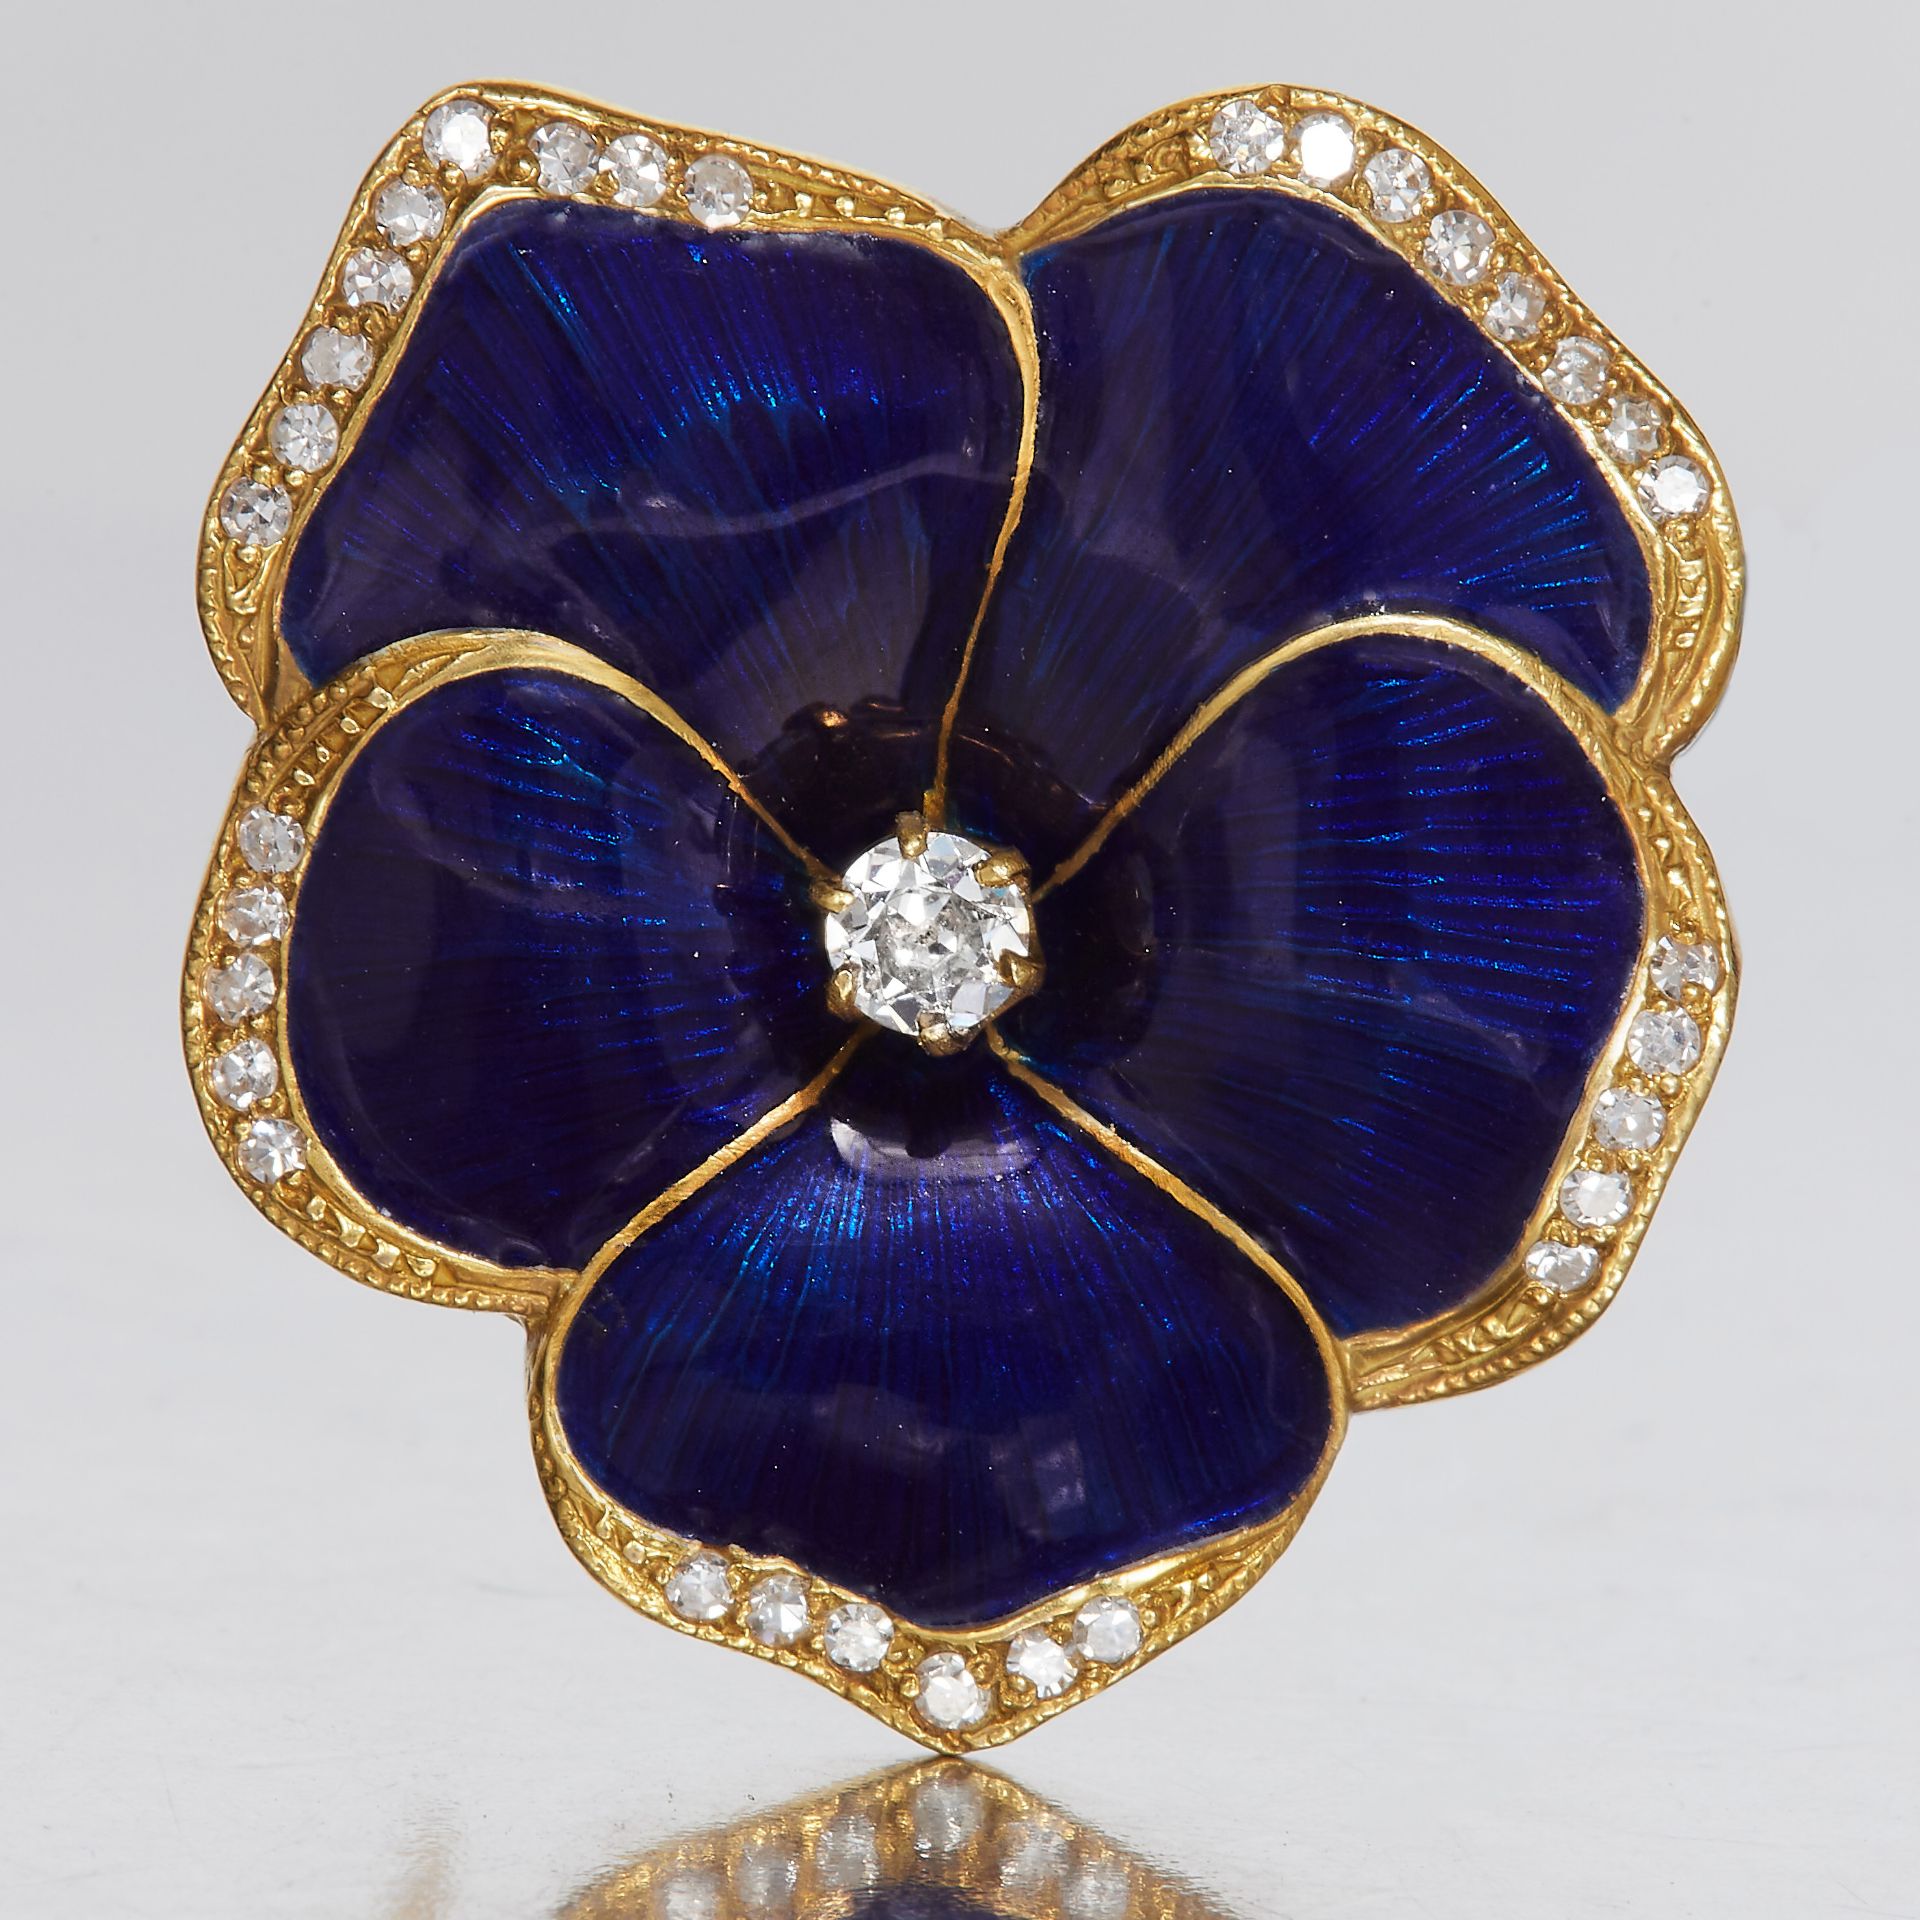 ANTIQUE ENAMEL AND DIAMOND FLORAL BROOCH